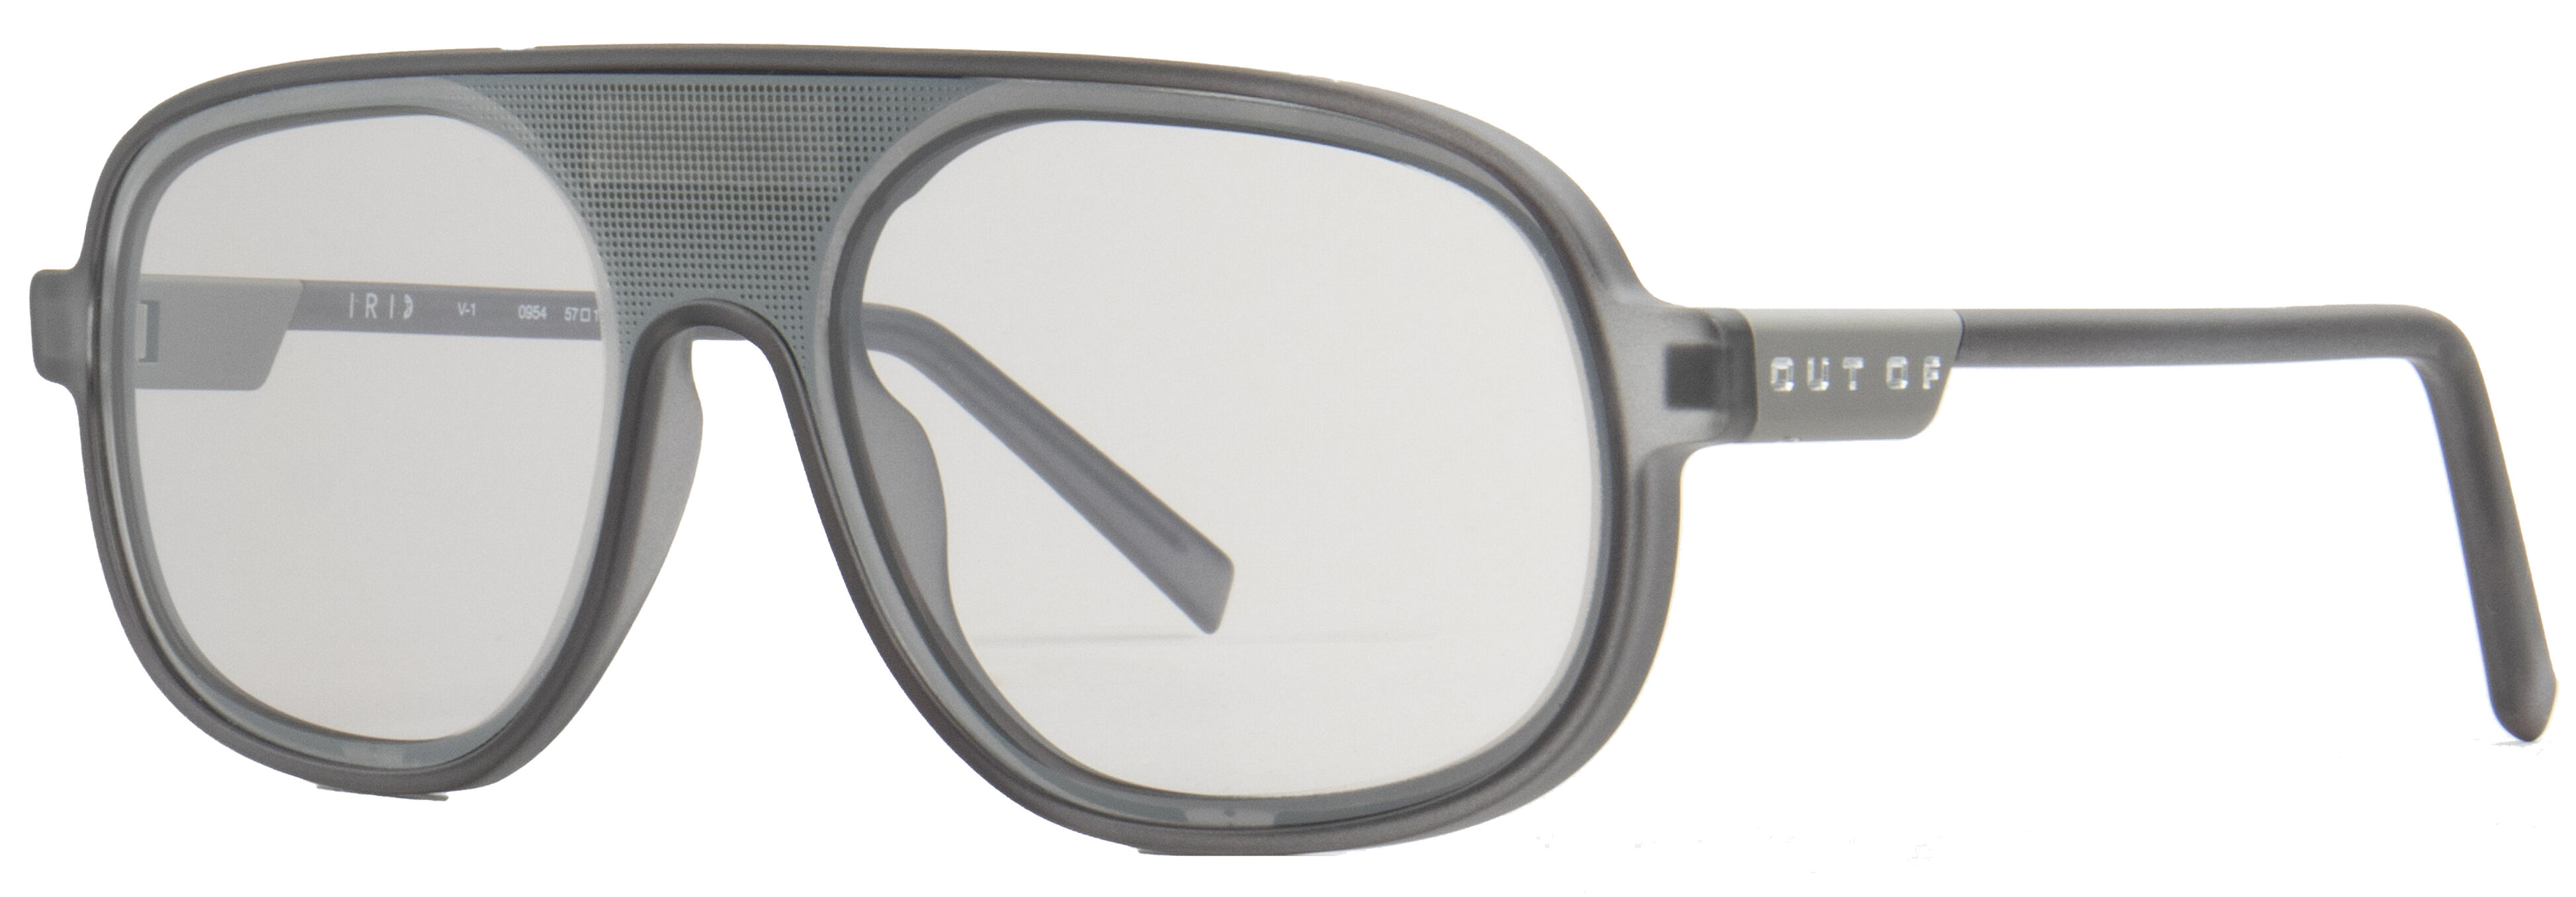 OUT OF VISION 1 FROST GREY SILVER IRID X10 One Size